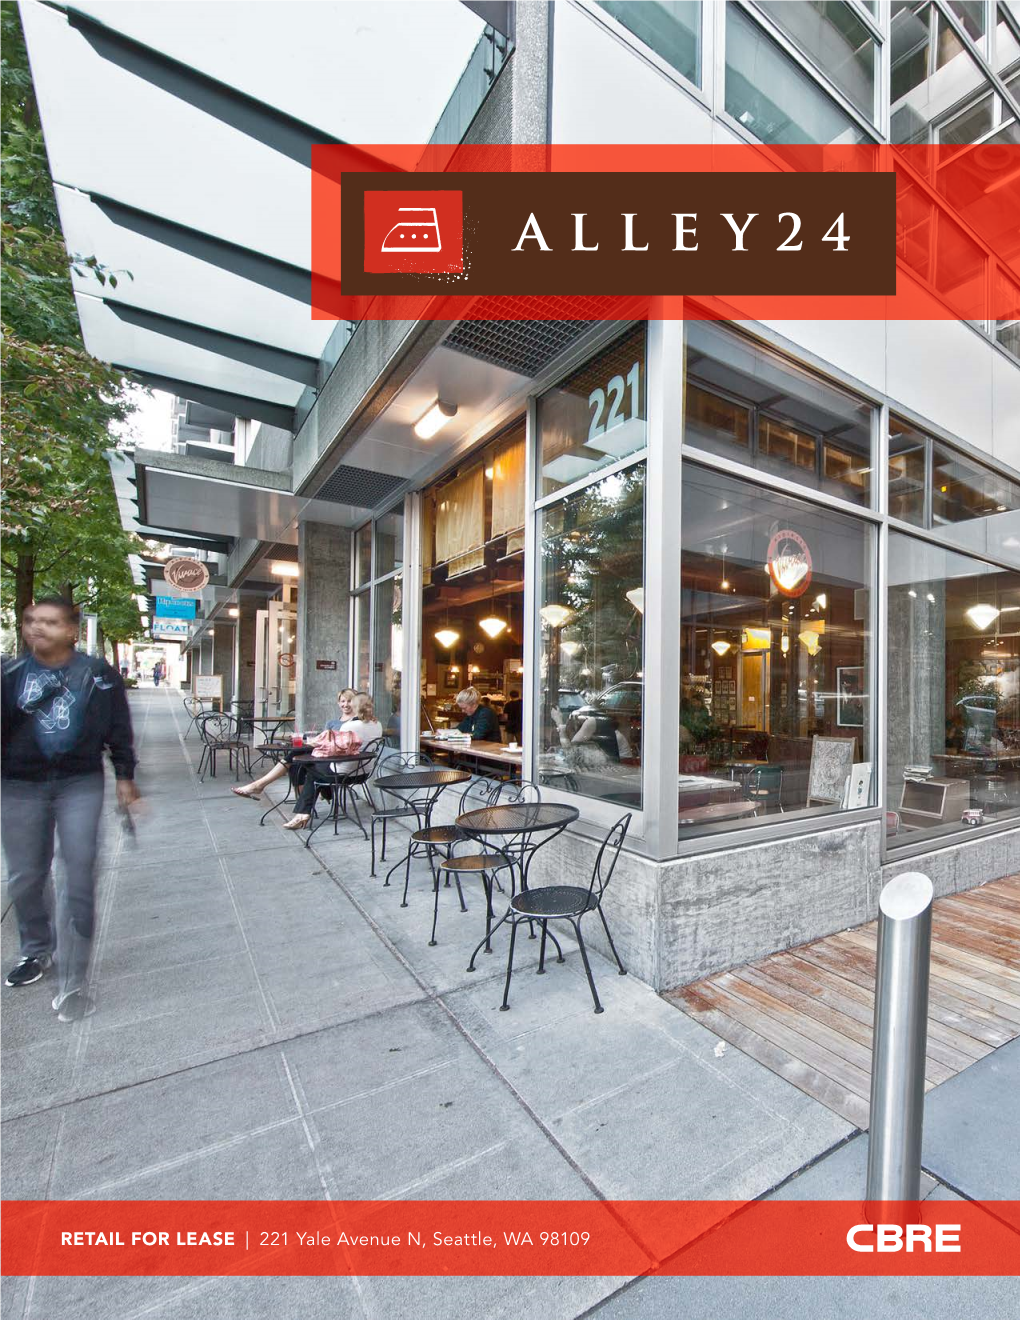 RETAIL for LEASE | 221 Yale Avenue N, Seattle, WA 98109 for RETAIL LEASING INFORMATION